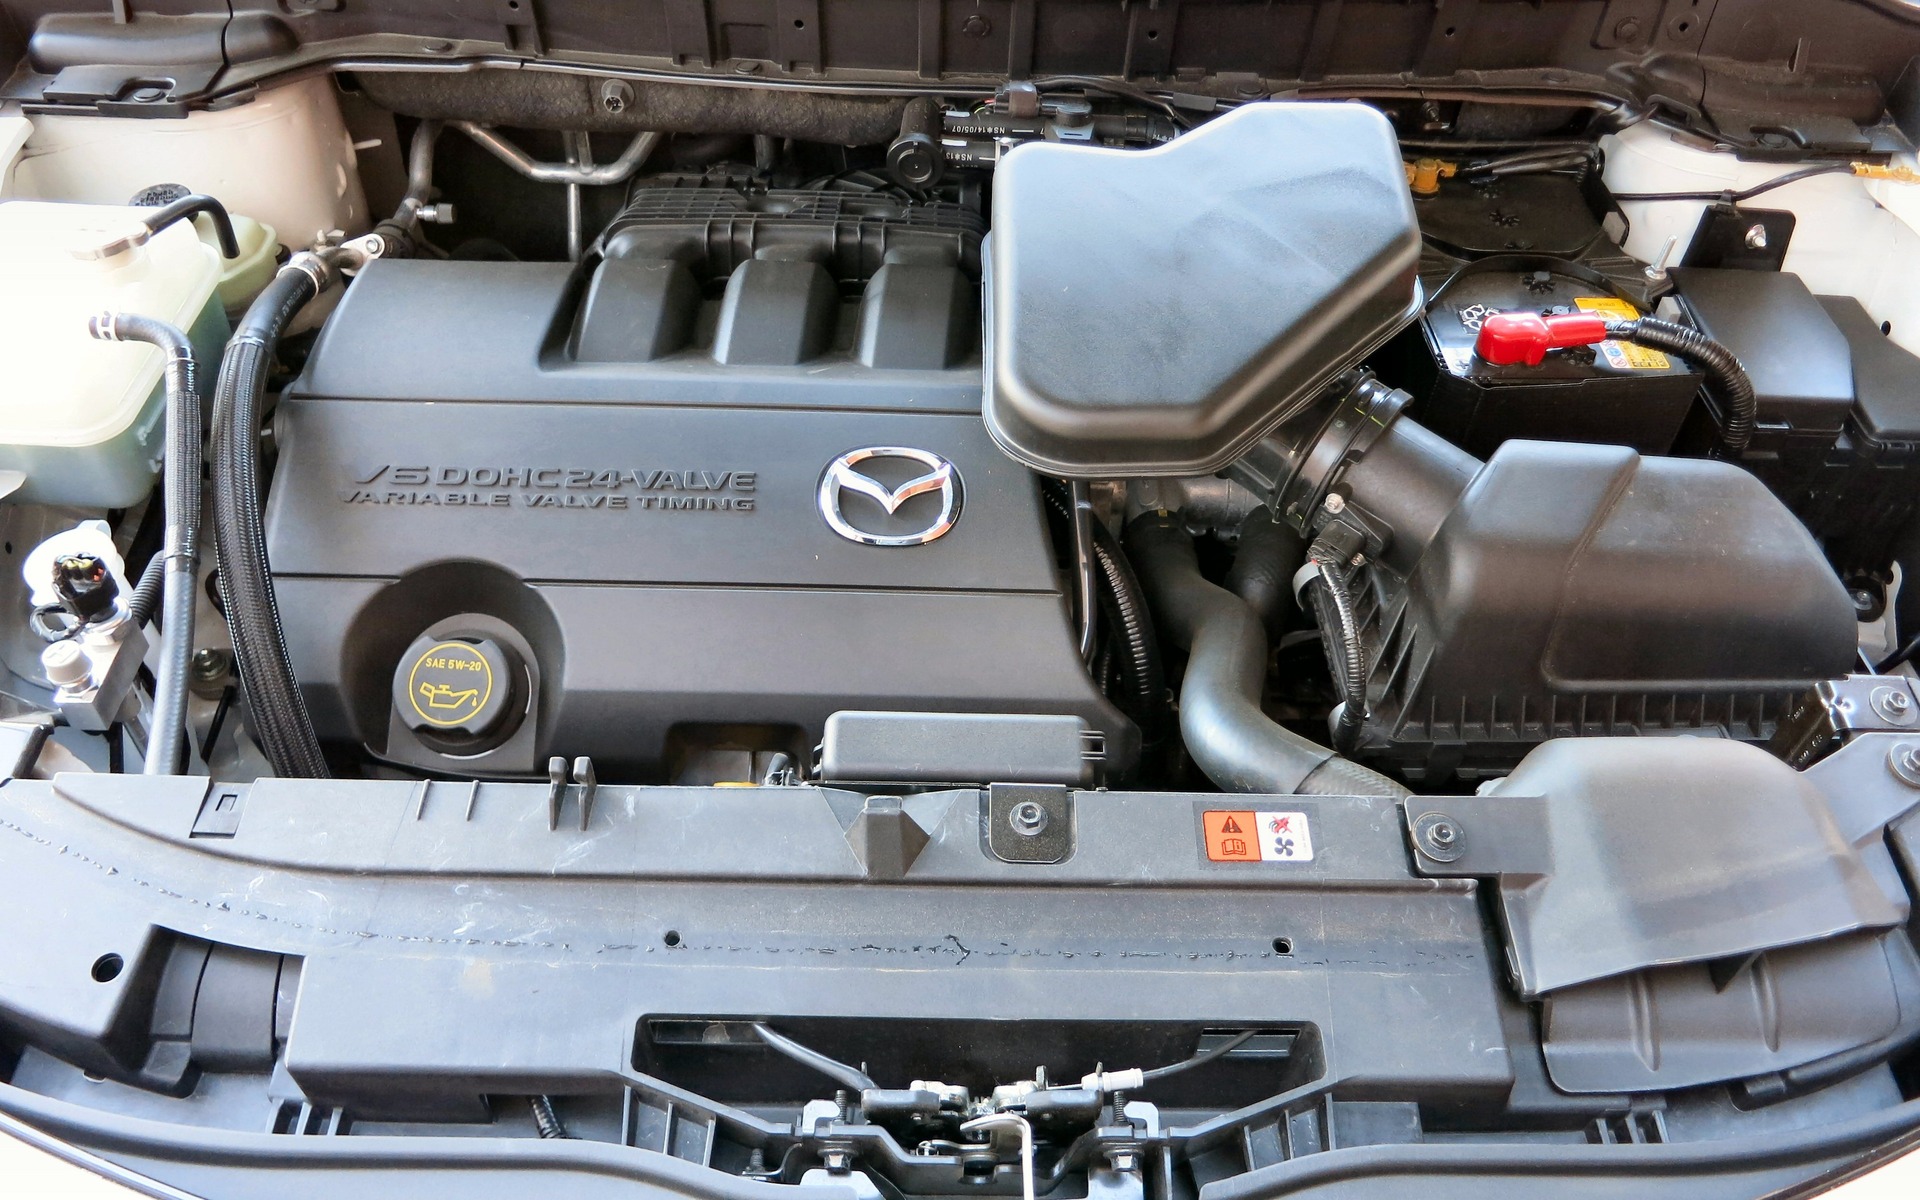 Power is decent, too, from the Mazda CX-9's standard 3.7-litre V6.